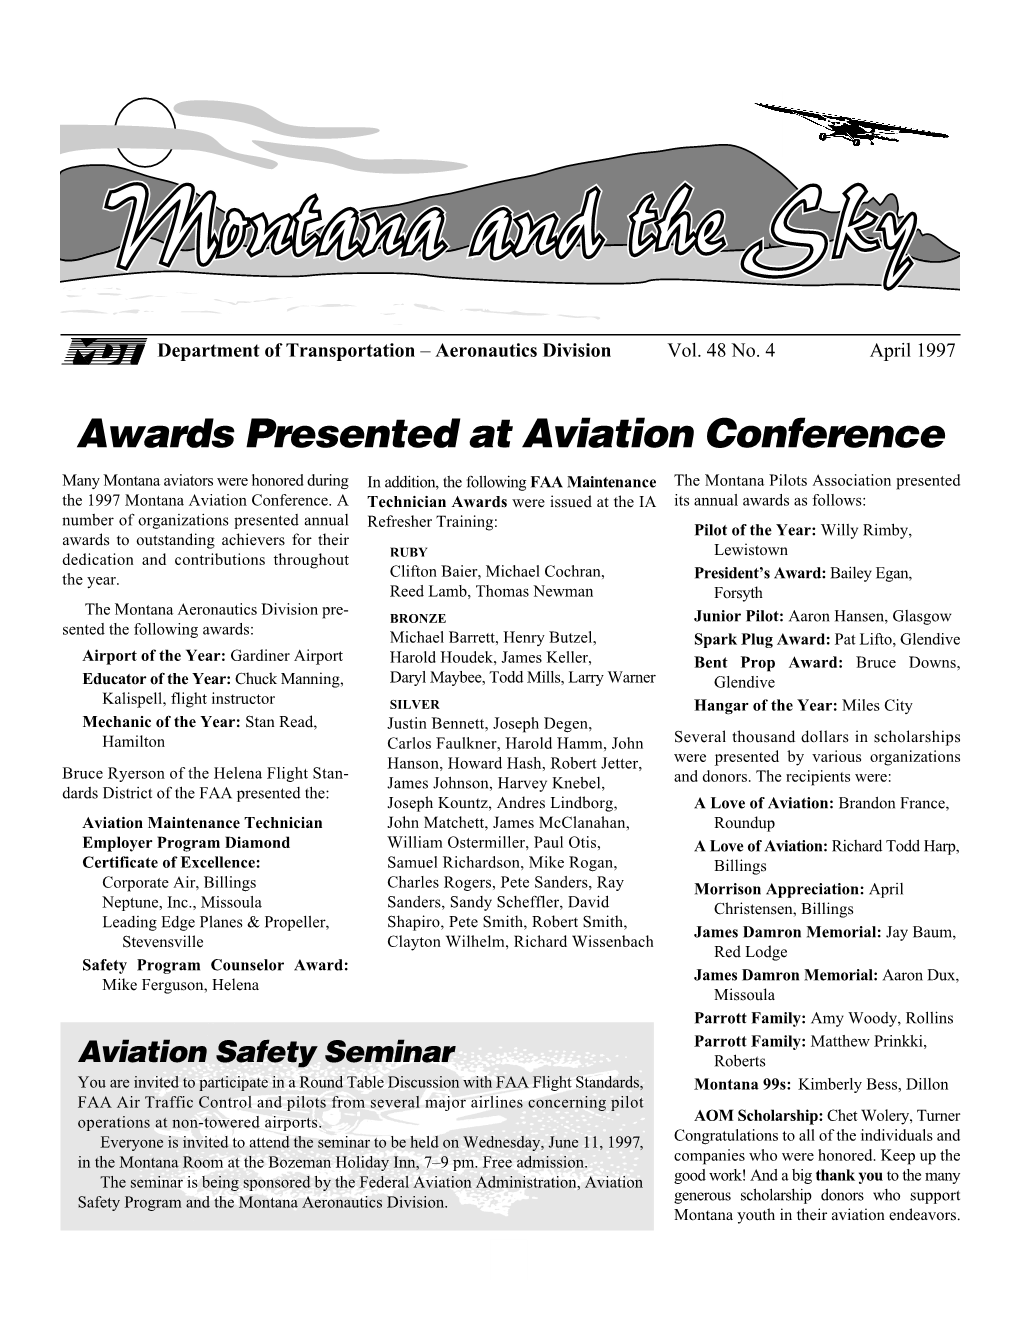 Awards Presented at Aviation Conference